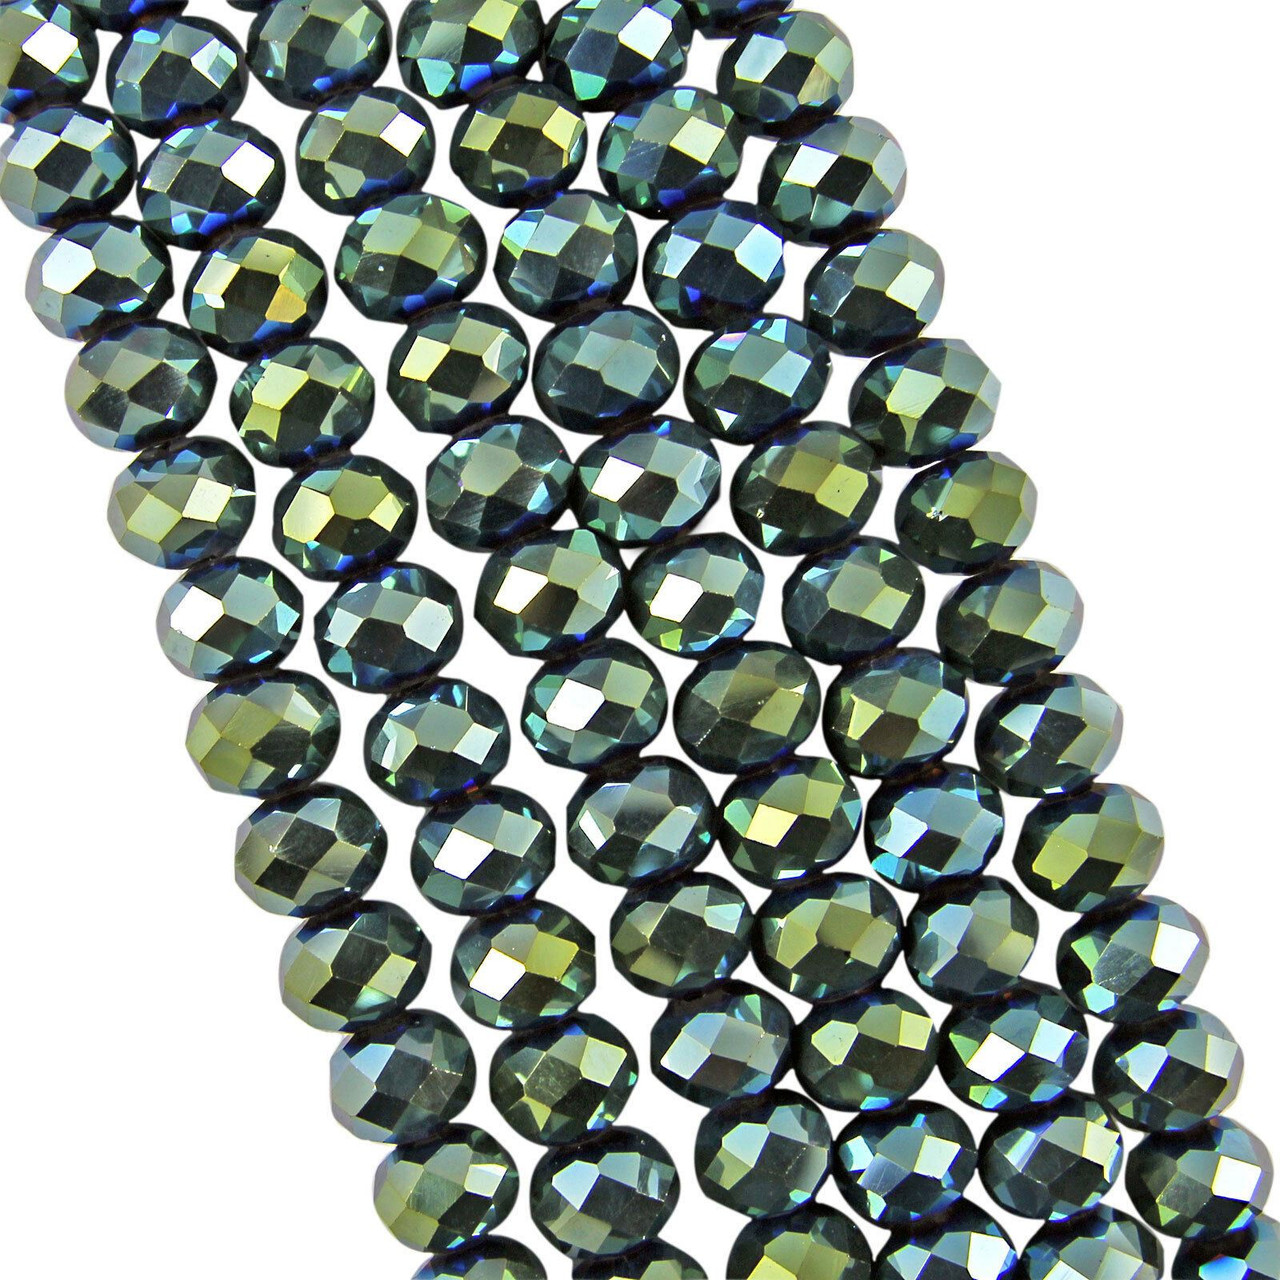 3x2mm Faceted Glass Rondelle beads - GREEN METALLIC - approx 16" strand (approx 200 beads)